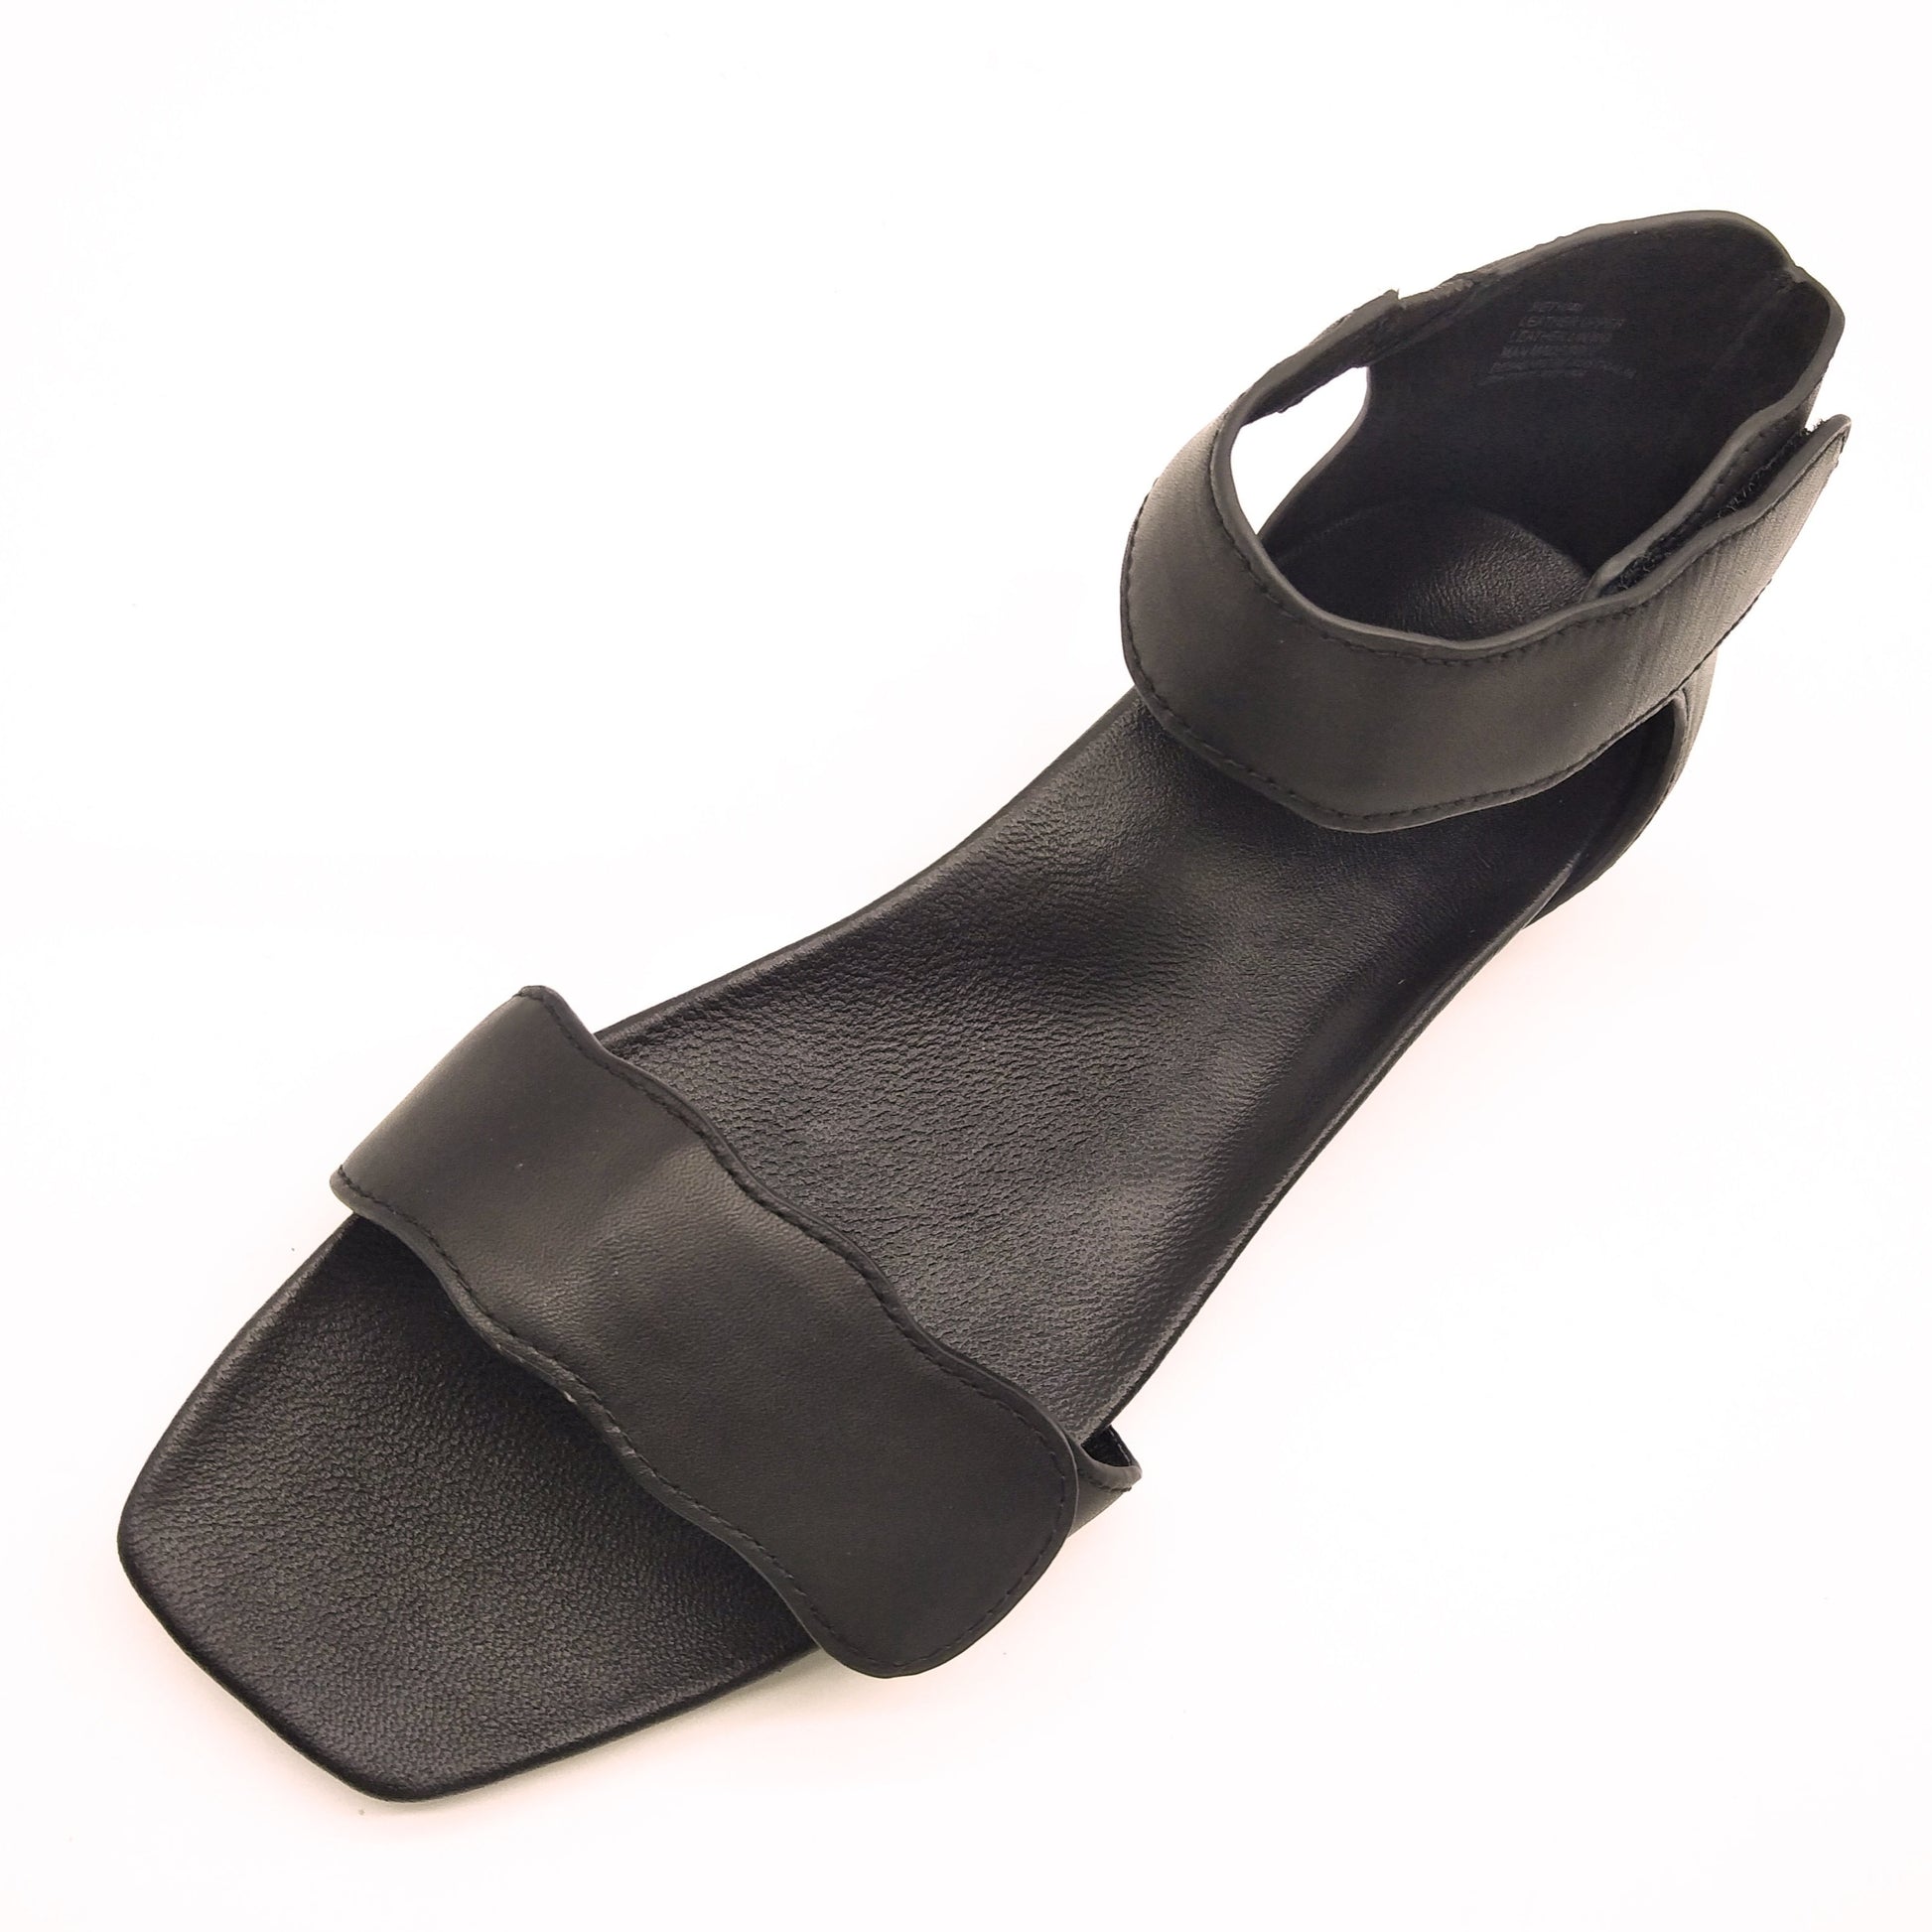 Light-weight Black leather sandals with adjustable strapes and arch support. Bio-contoured footbed, wide feet friendly